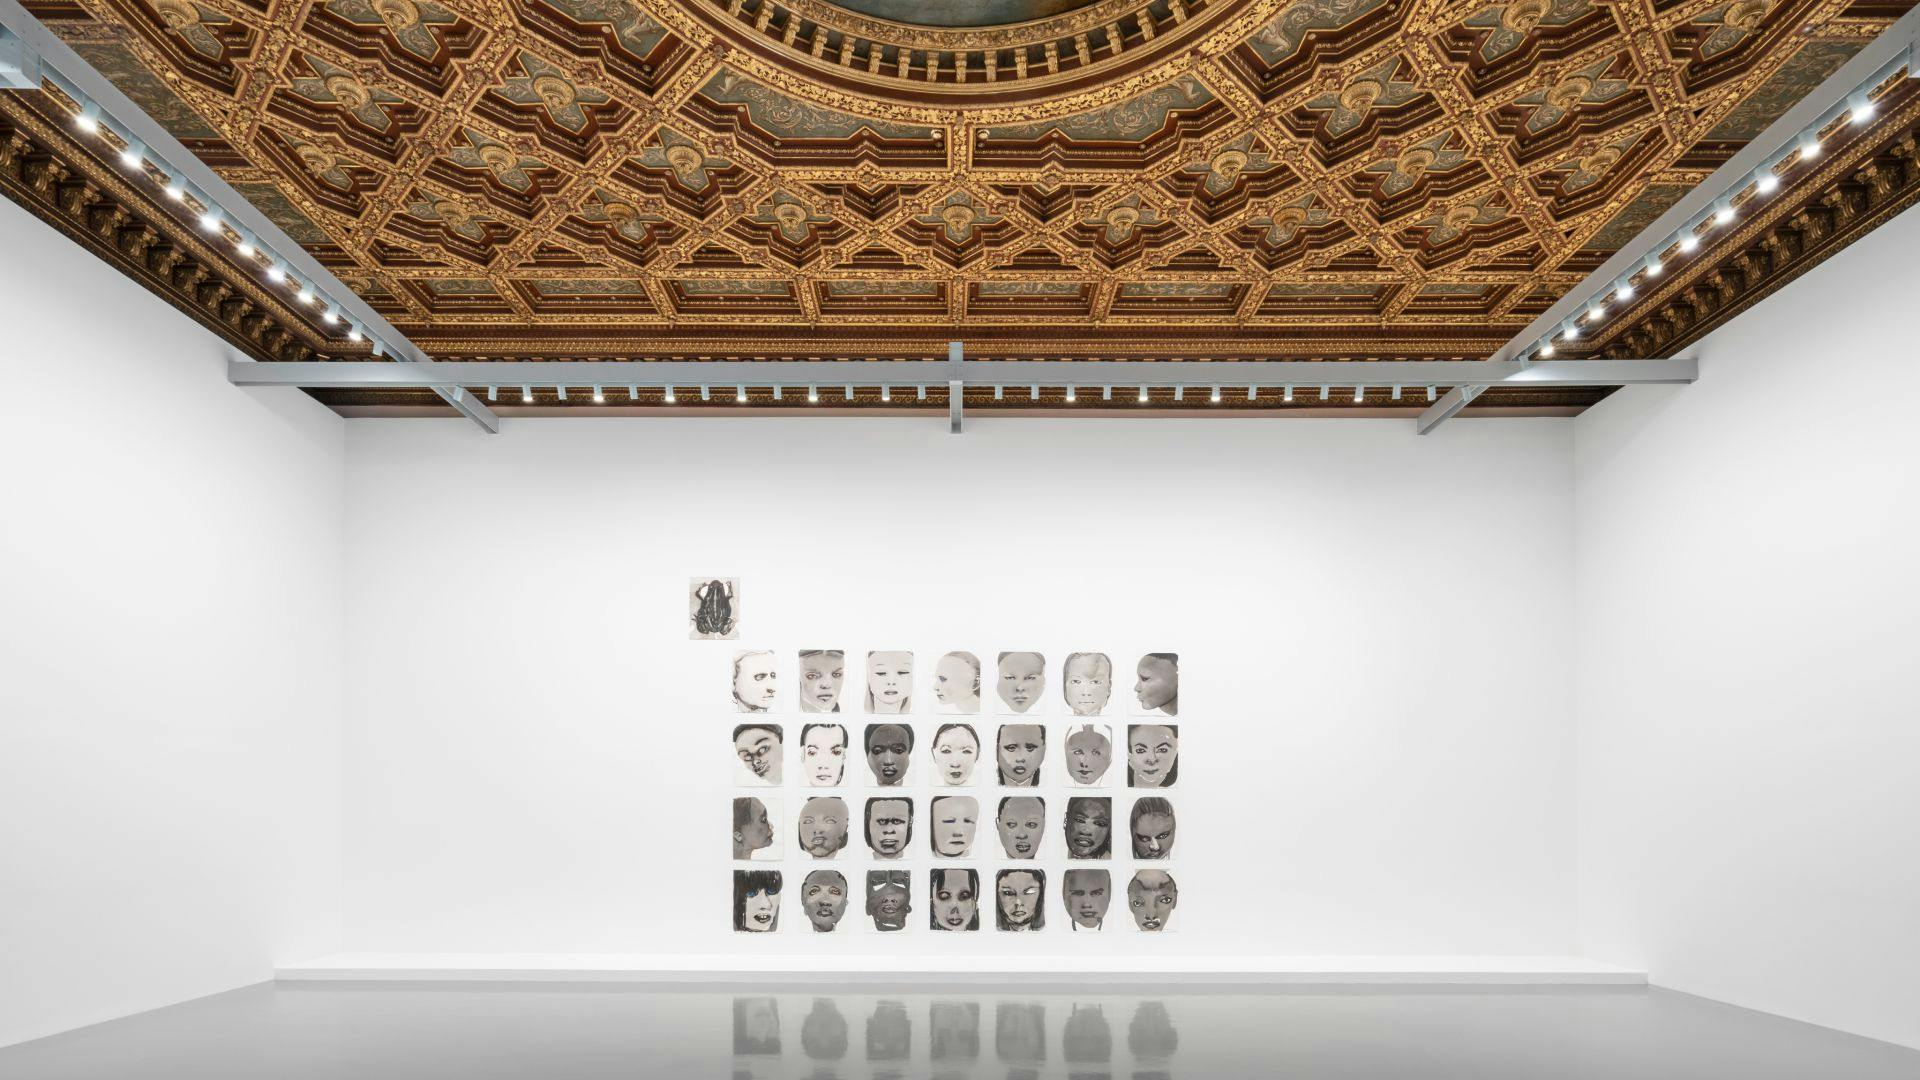 Installation view of the exhibition, Marlene Dumas. open-end, at Palazzo Grassi in Venice, dated 2022.